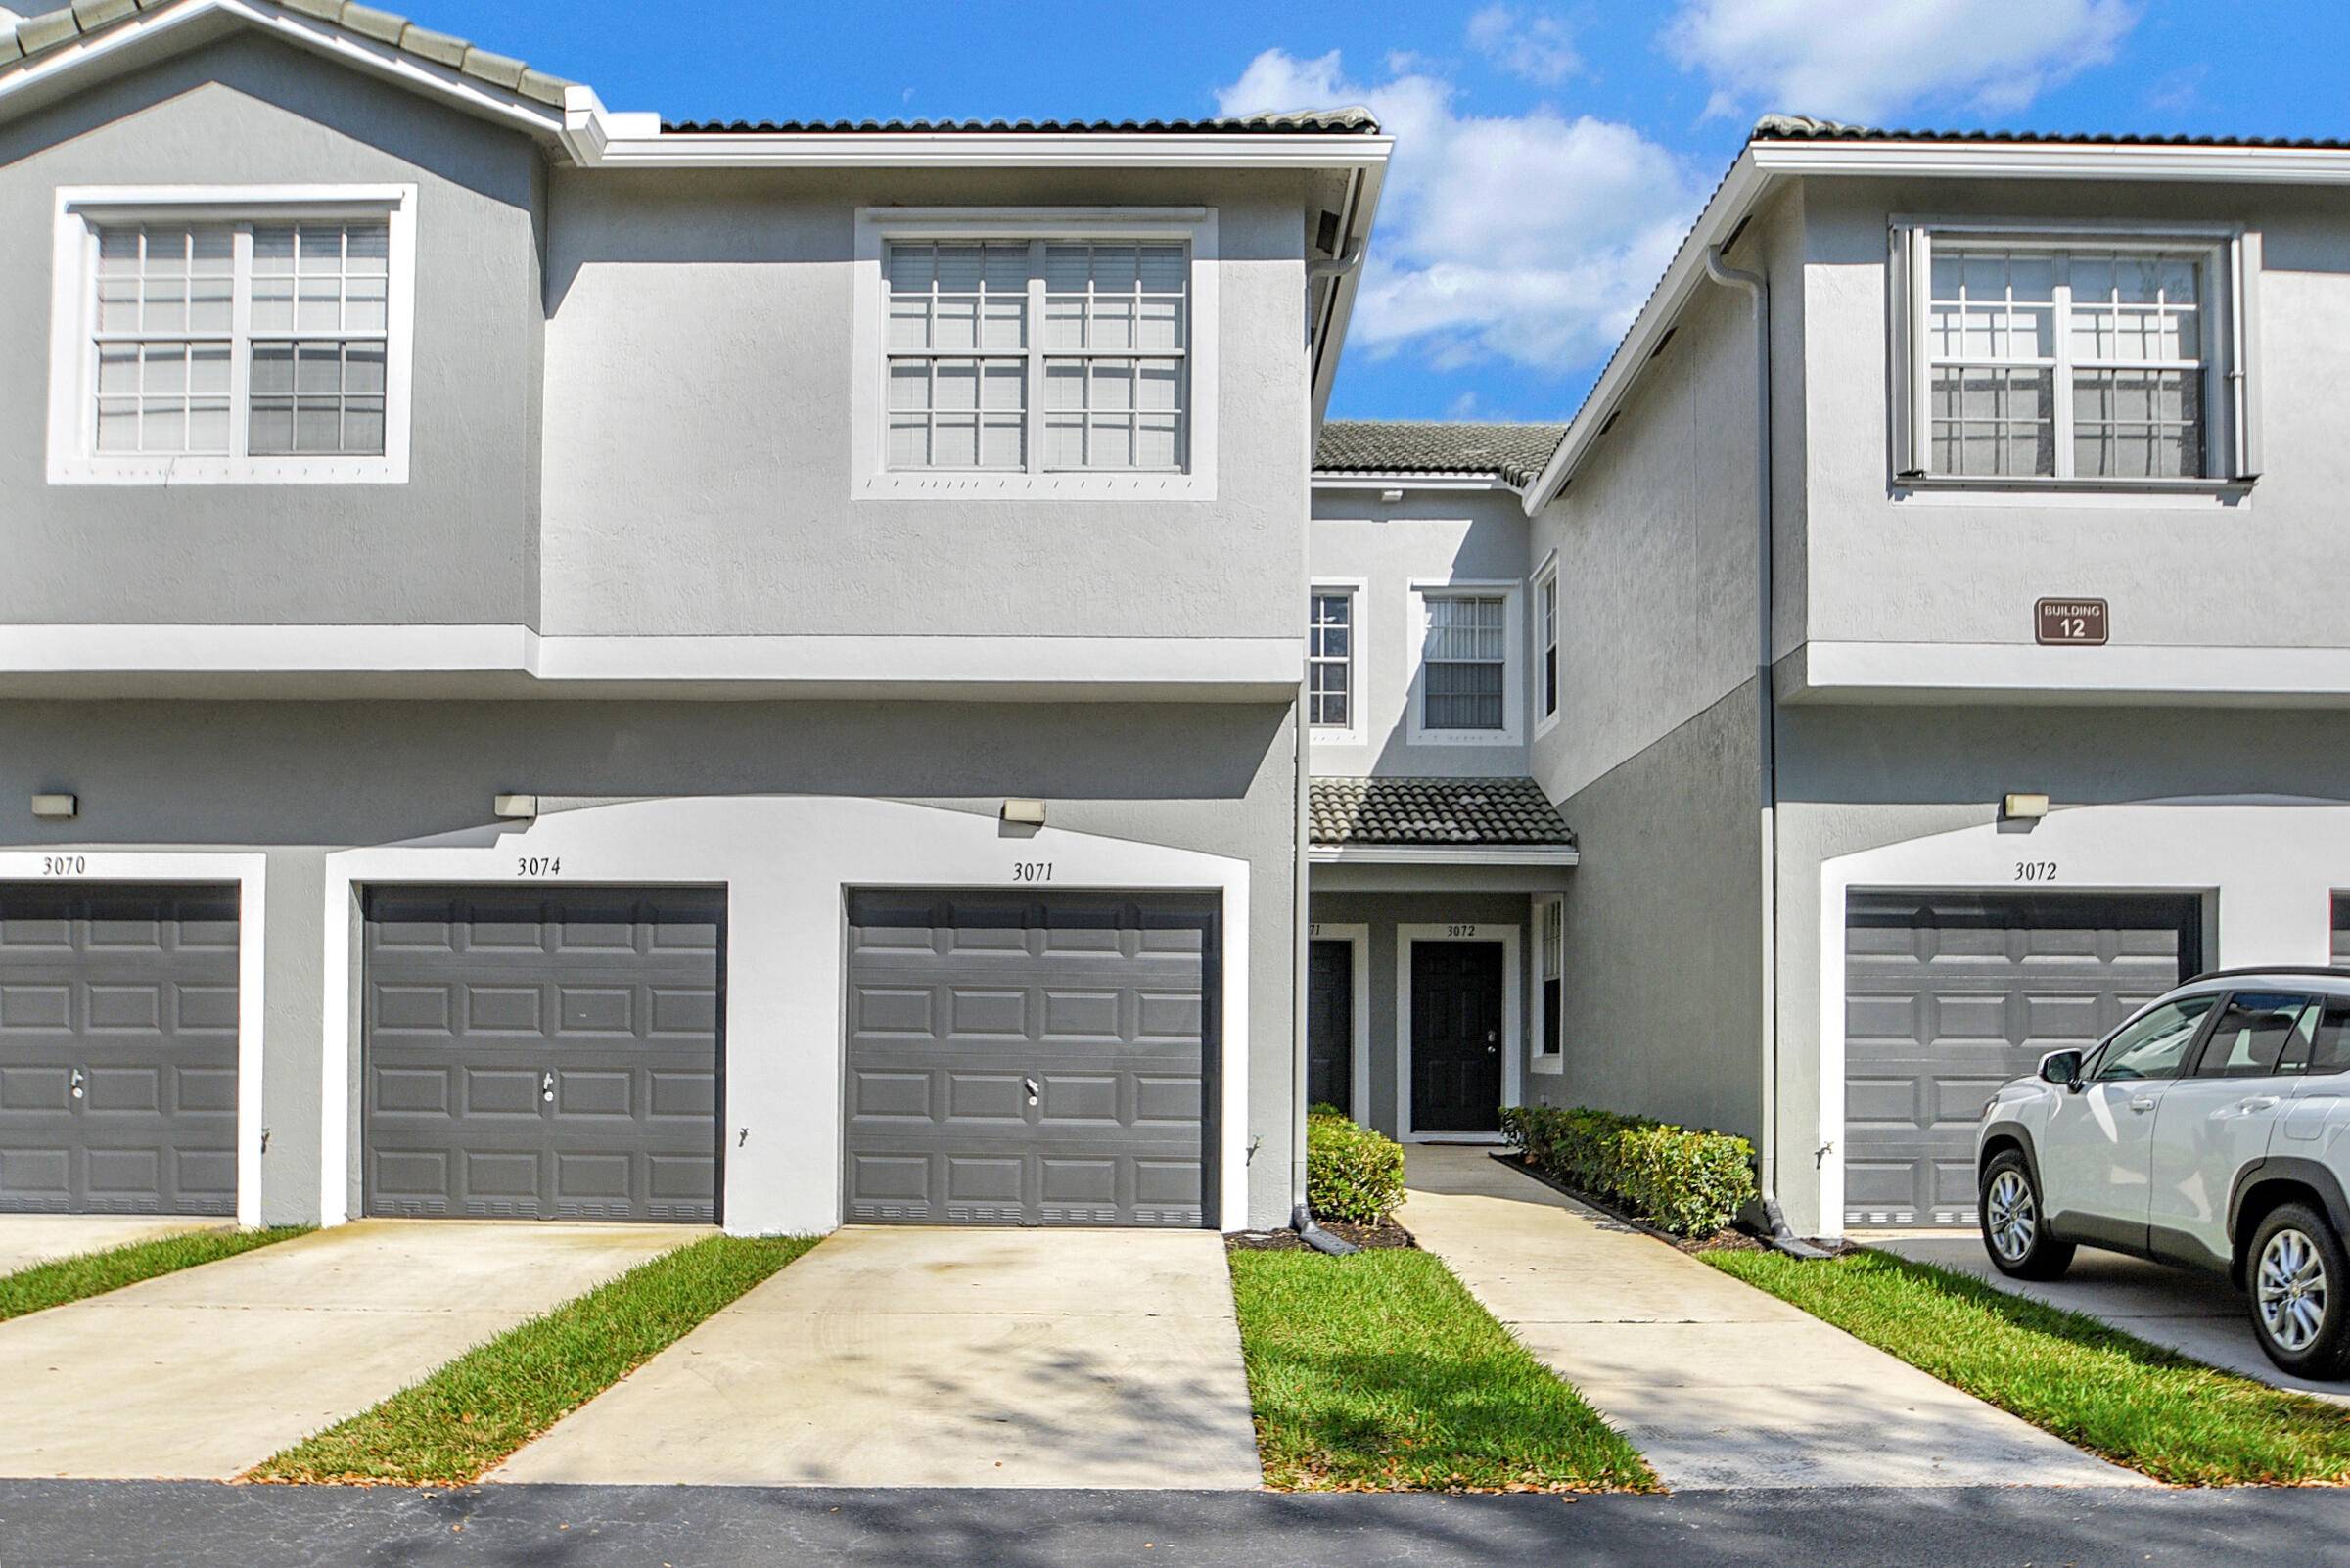 Beautiful 3 Bed 2. 1 Bath, Pet Friendly Townhome in the All Age, Gated community of Magnolia Bay in Greenacres.